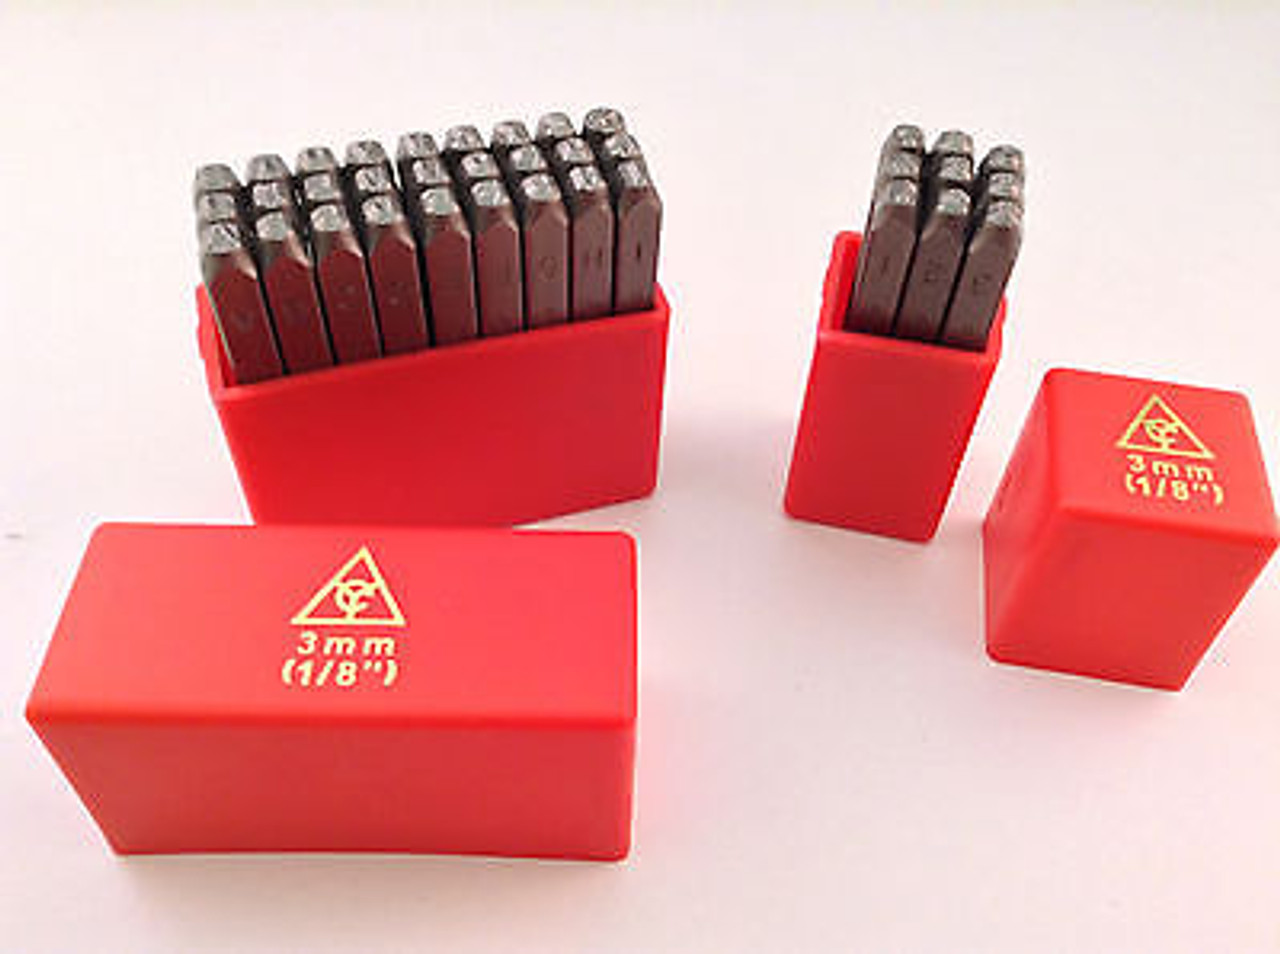 36pcs 6-7mm Small font letter number Stamp+Pattern Punch Set For